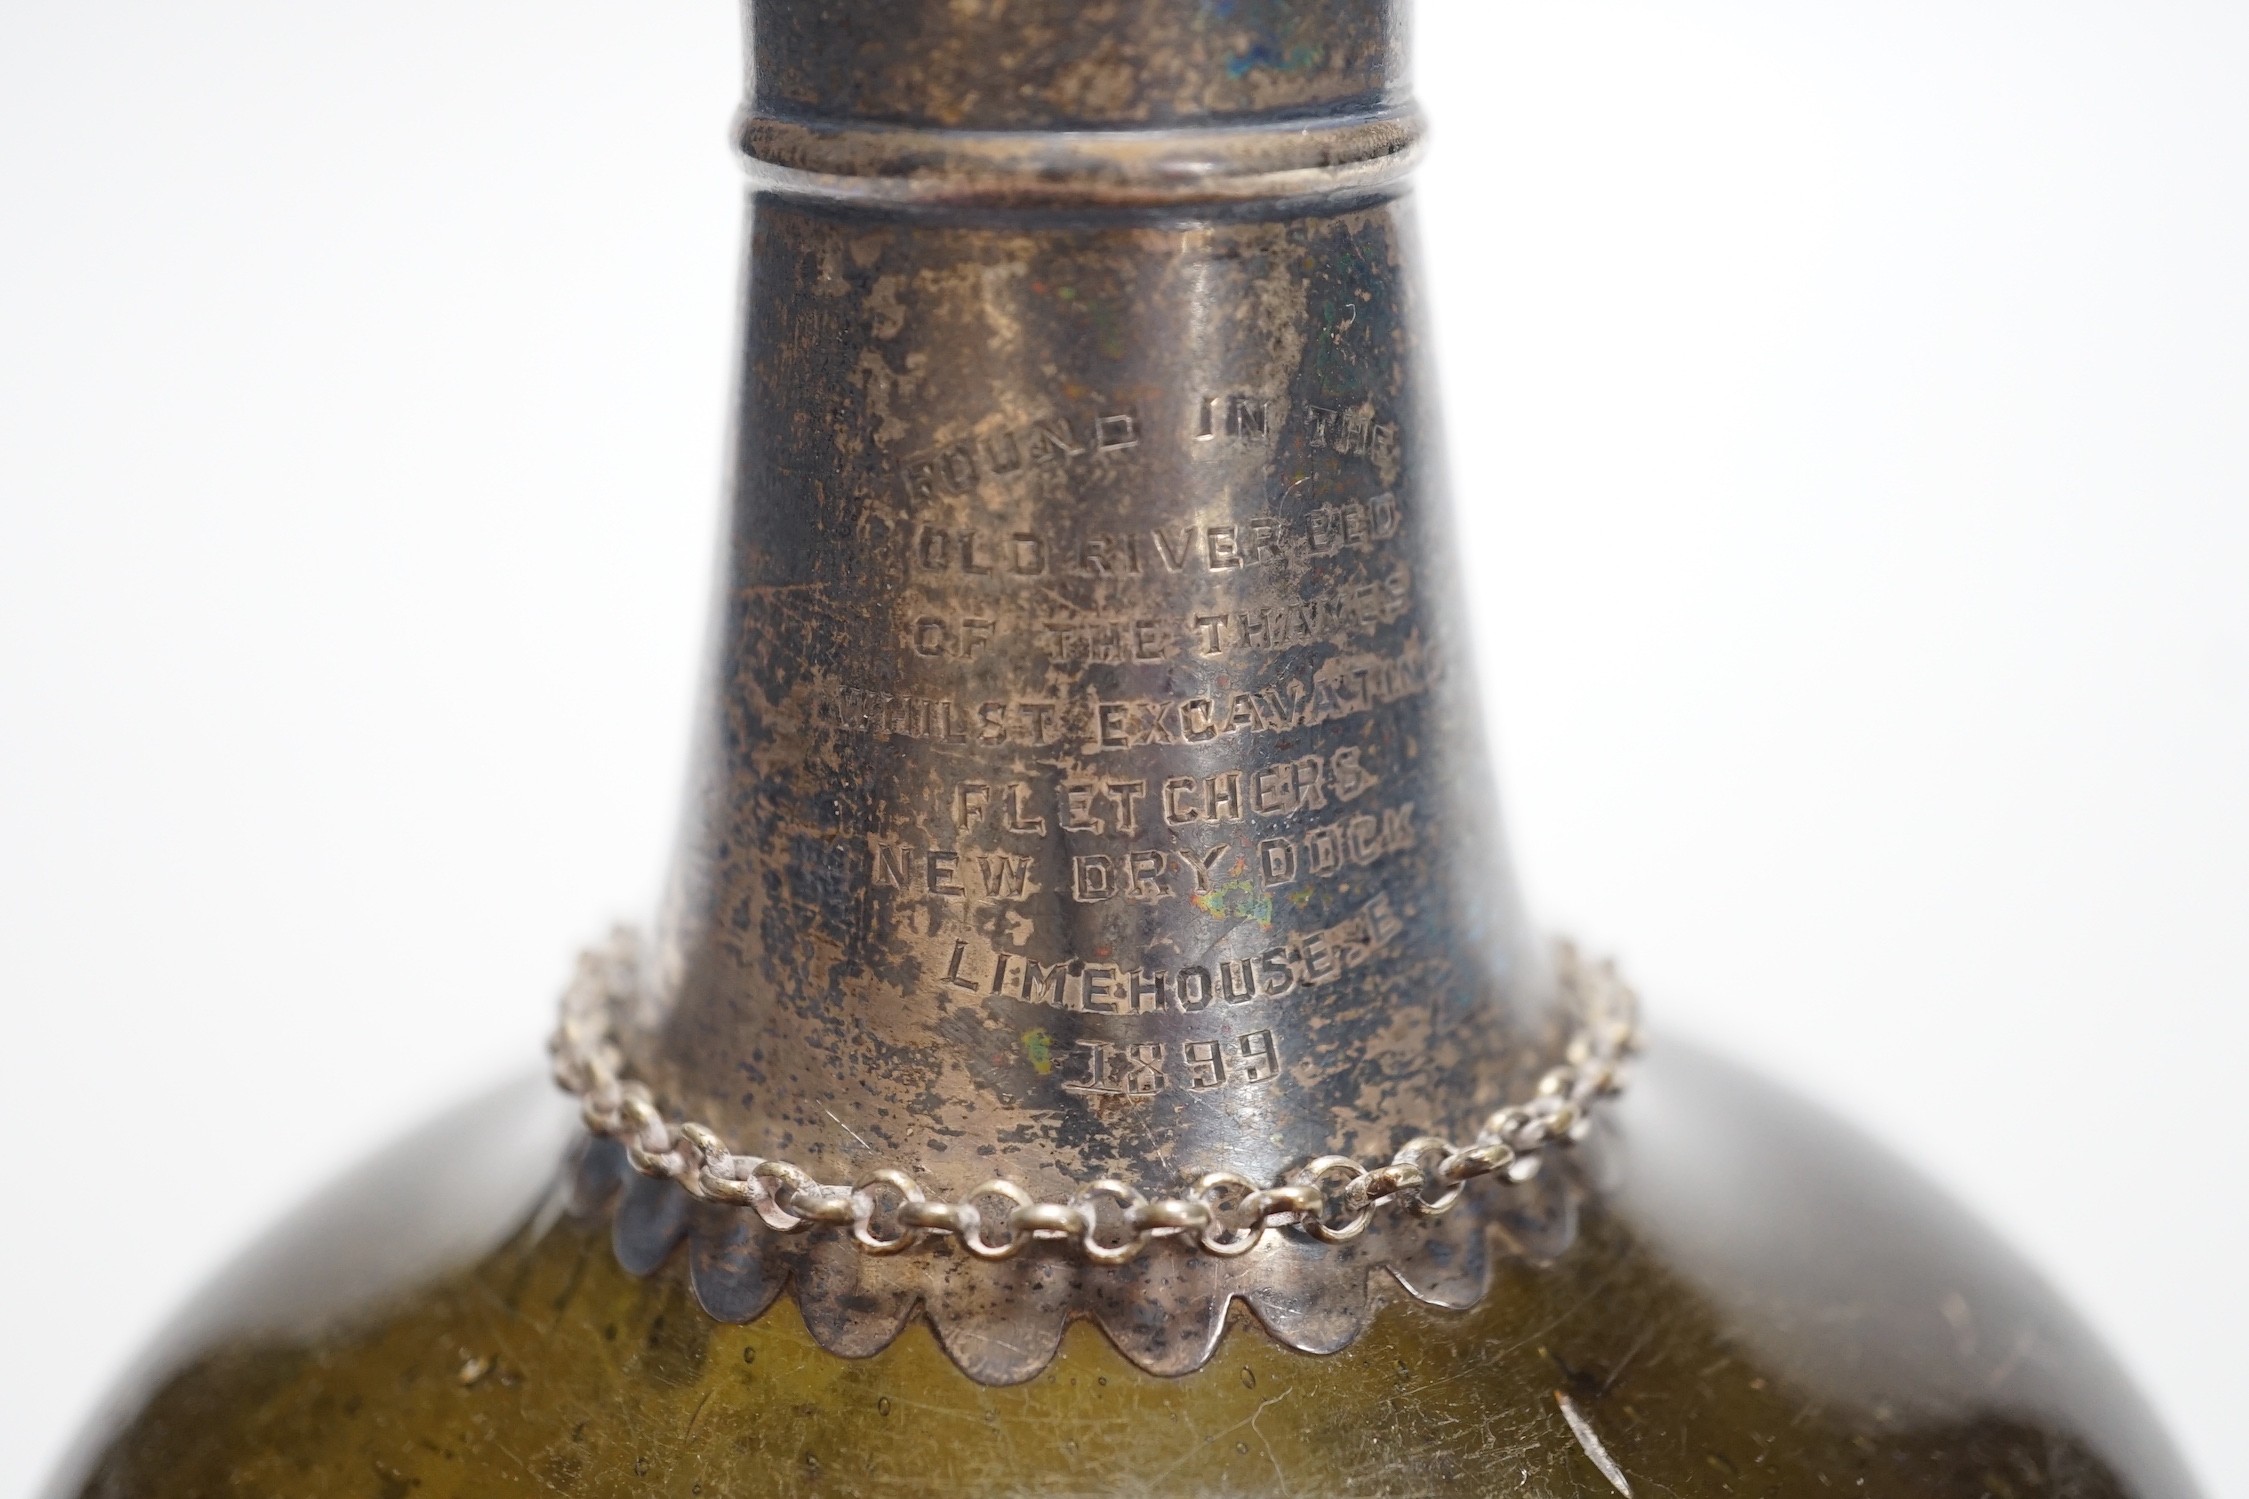 An 18th century green glass onion-shape bottle, with later silver mount, London, 1899, together with a George III silver 'S' decanter label, Phipps & Robinson, London, 1806. 17cm